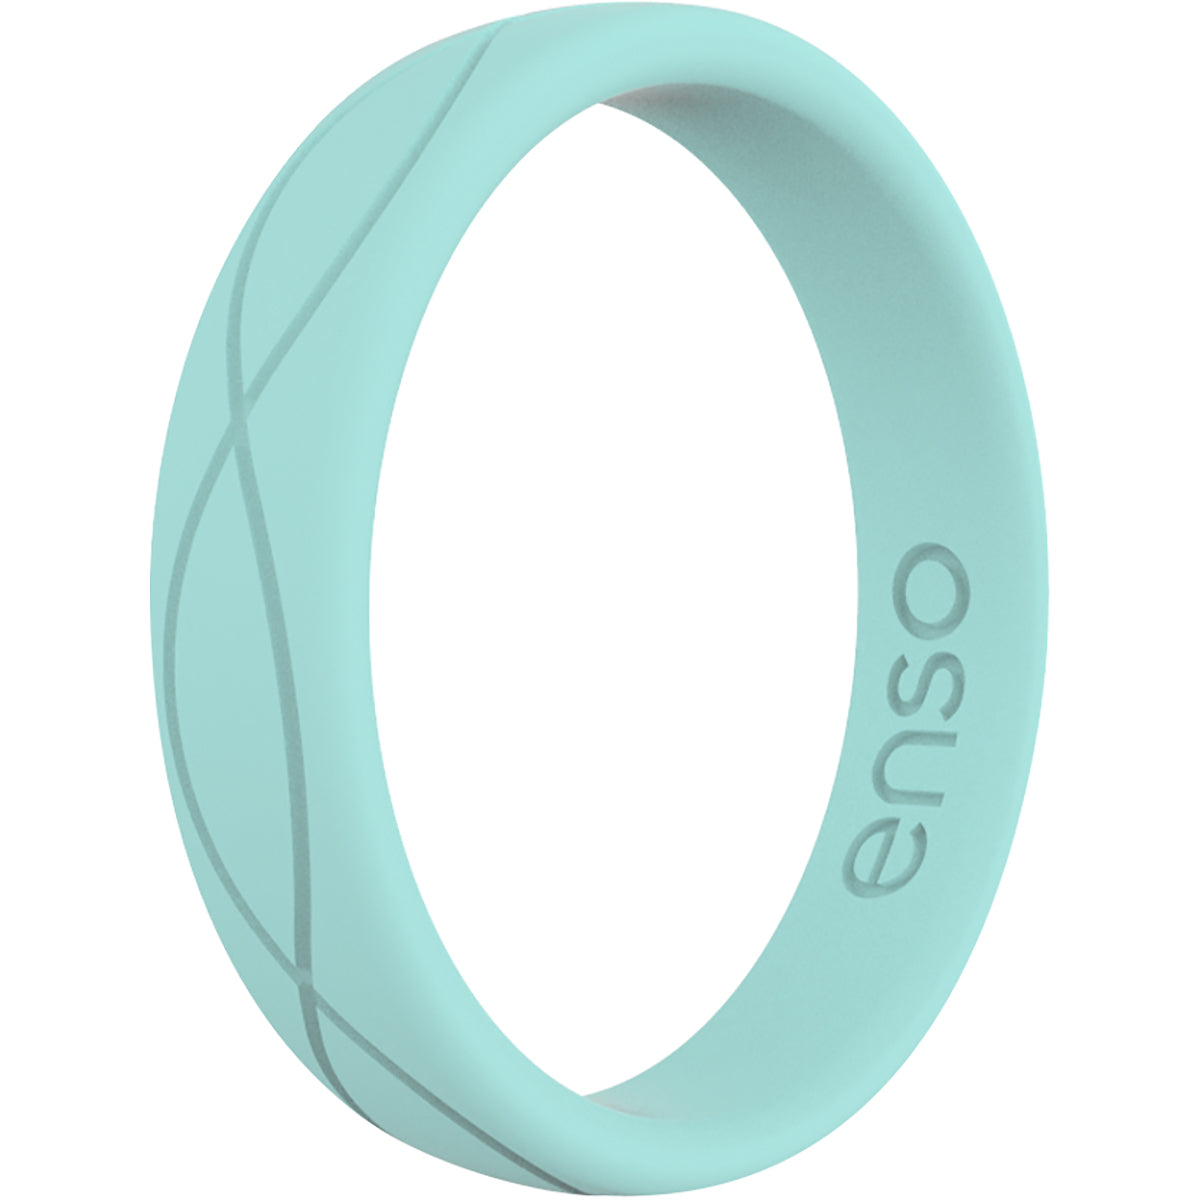 Enso Rings Women's Infinity Series Silicone Ring - Turquoise Enso Rings